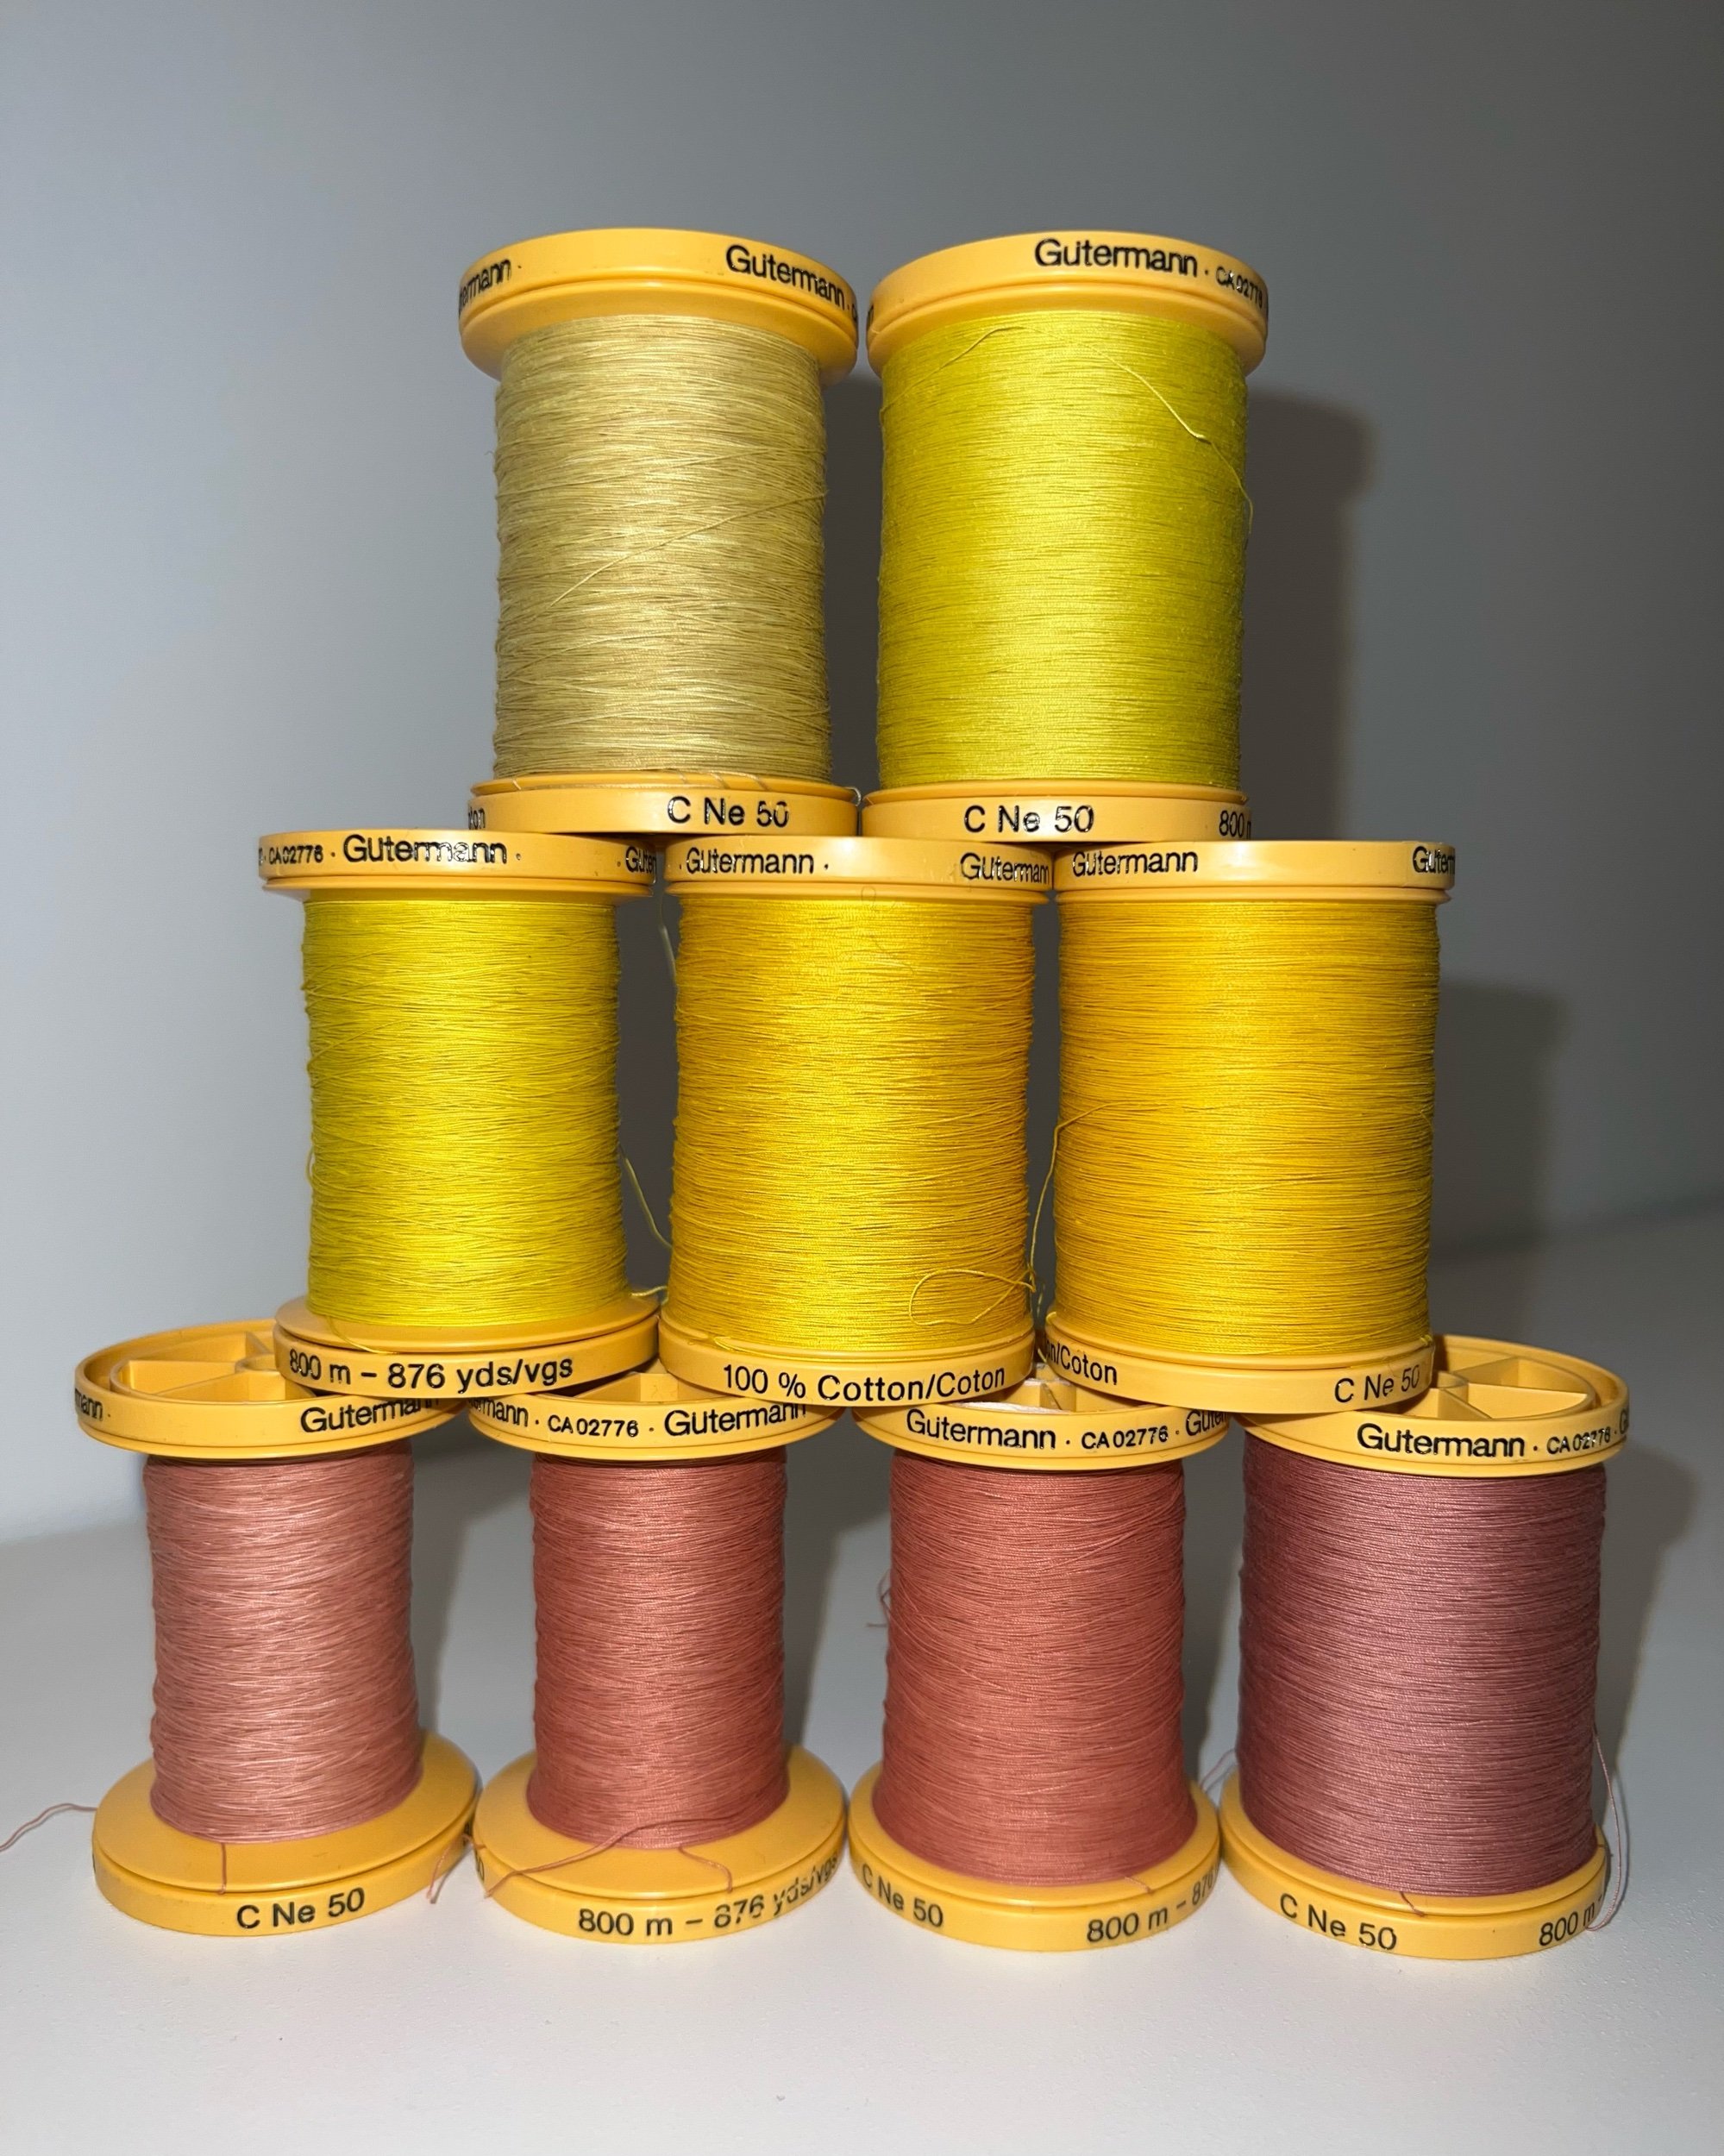  Hand-dyed cotton sewing thread with weld (top), turmeric (middle), and madder root (bottom) 